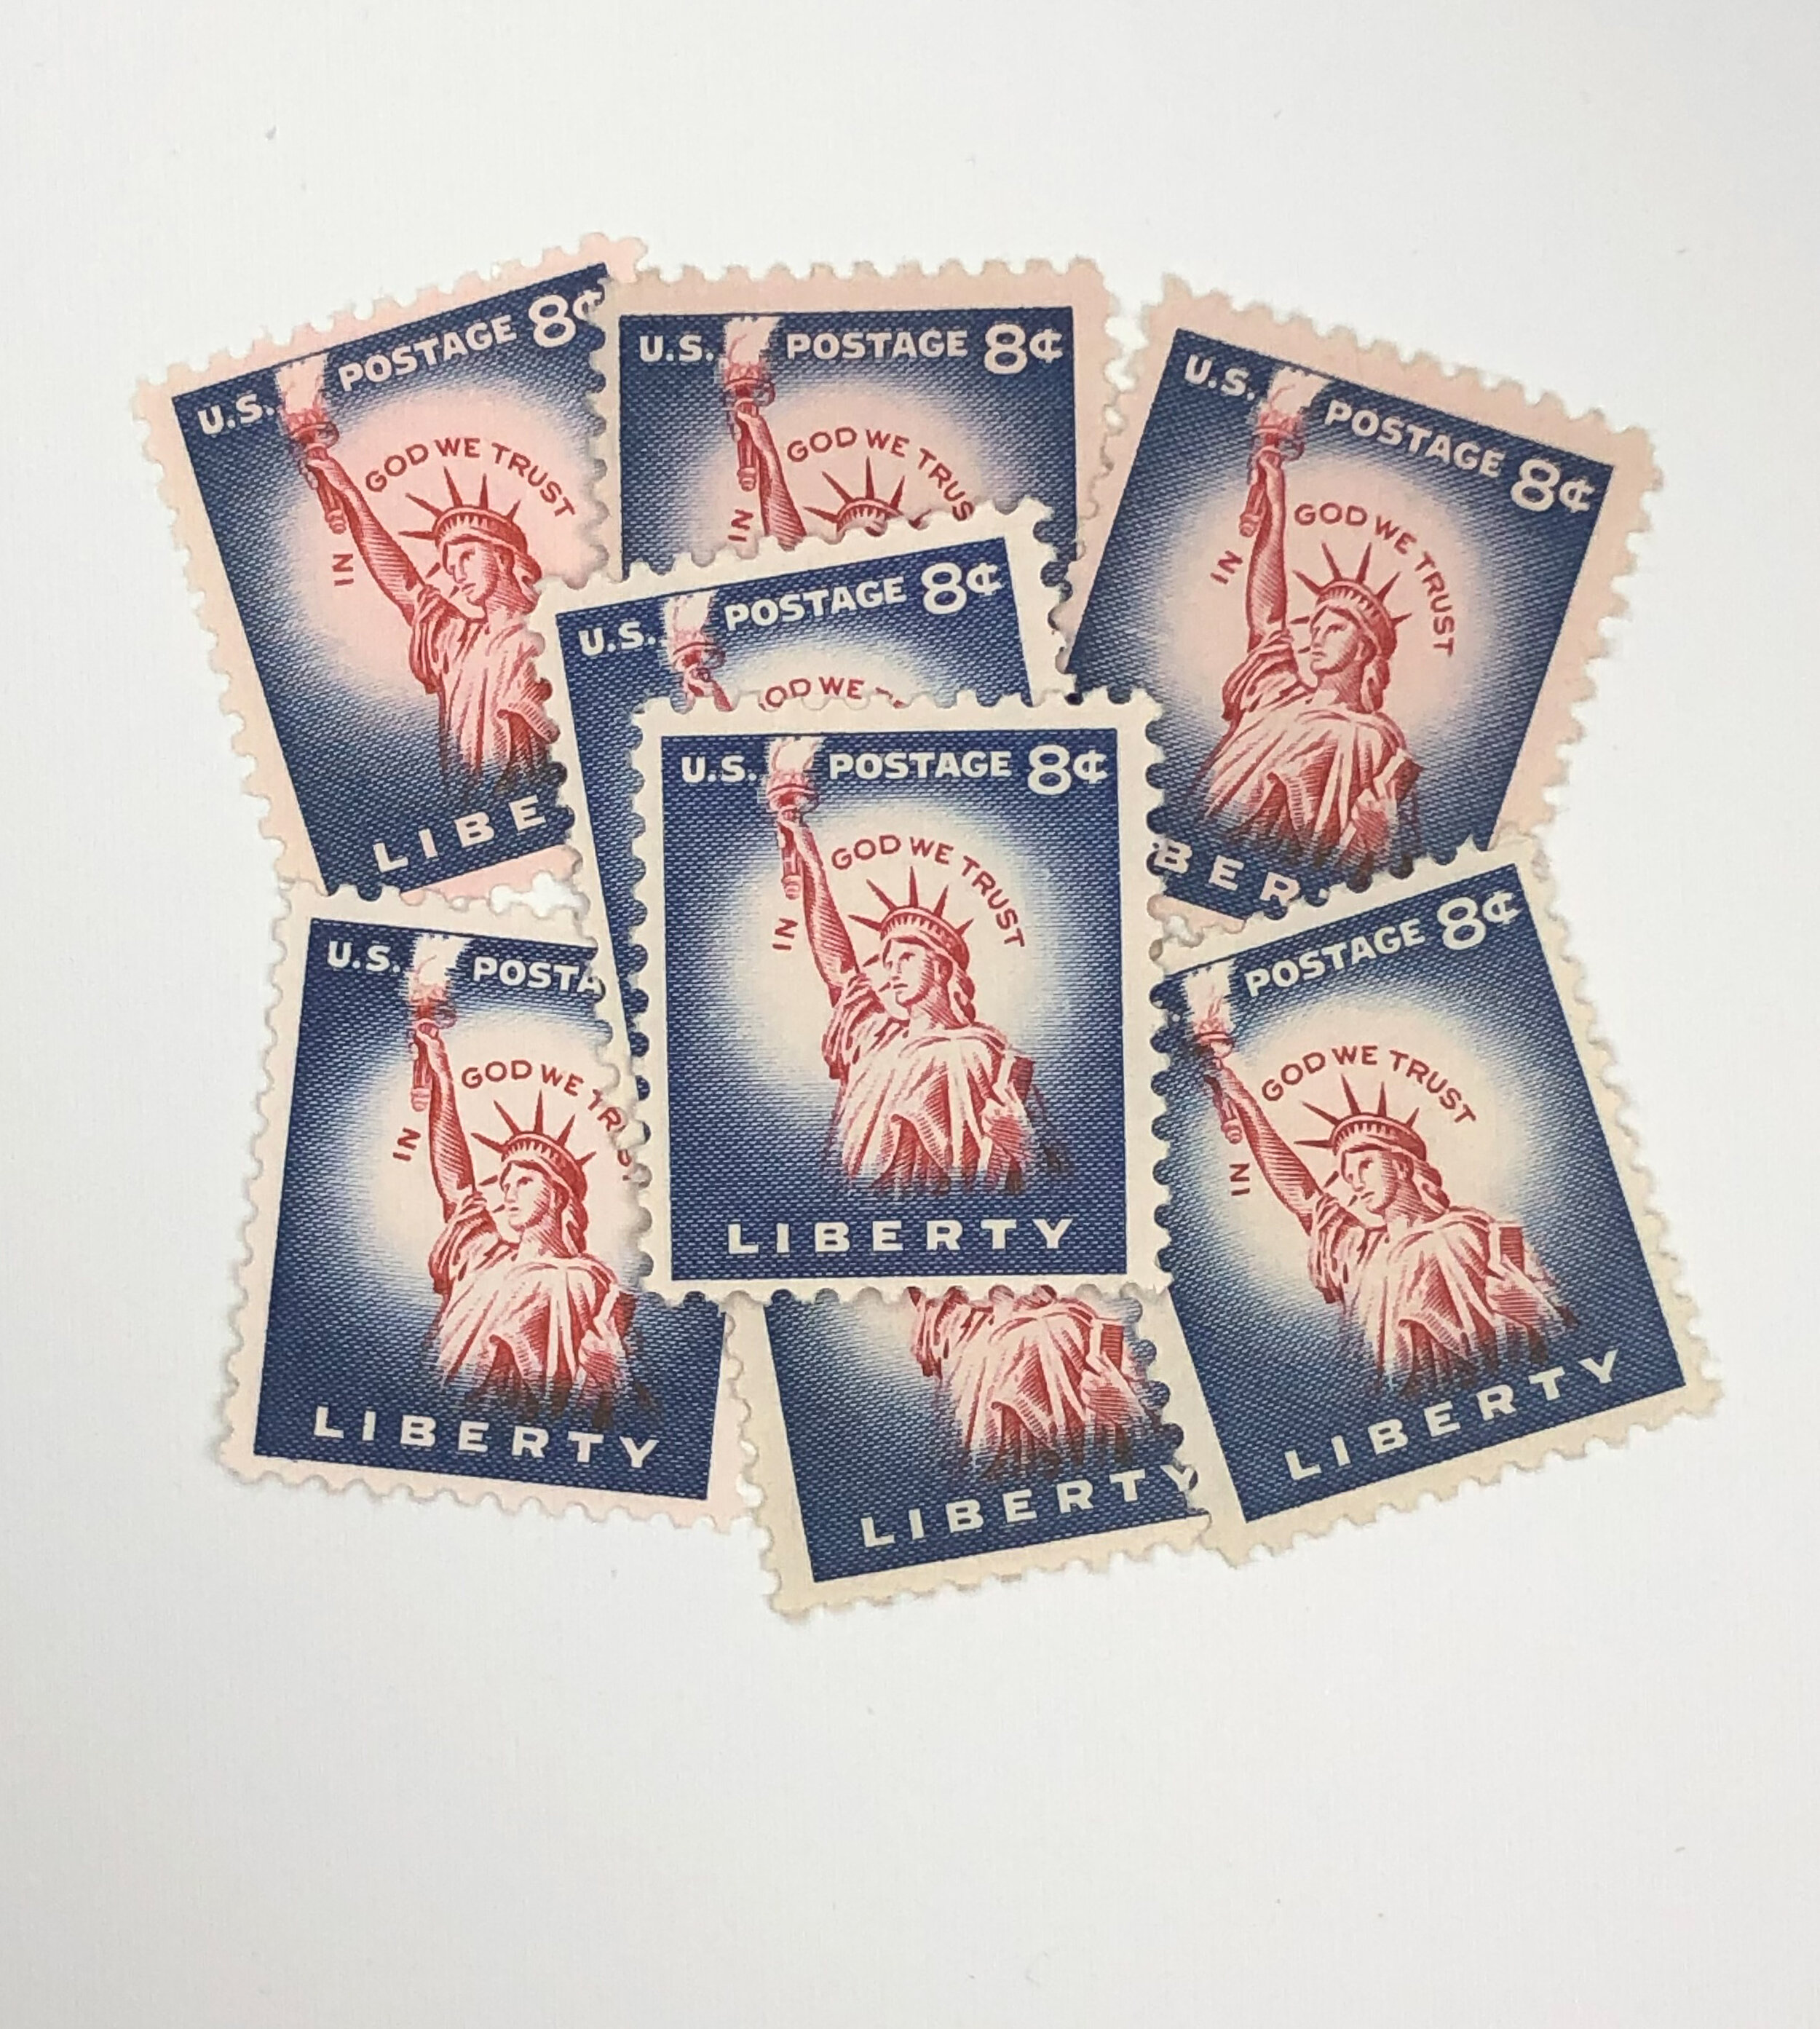 Stamps 1992 Postage Stamps for Mailing Letters or Crafts and Scrapbooking American Freedom Statue of Liberty Booklet of 18 U.S